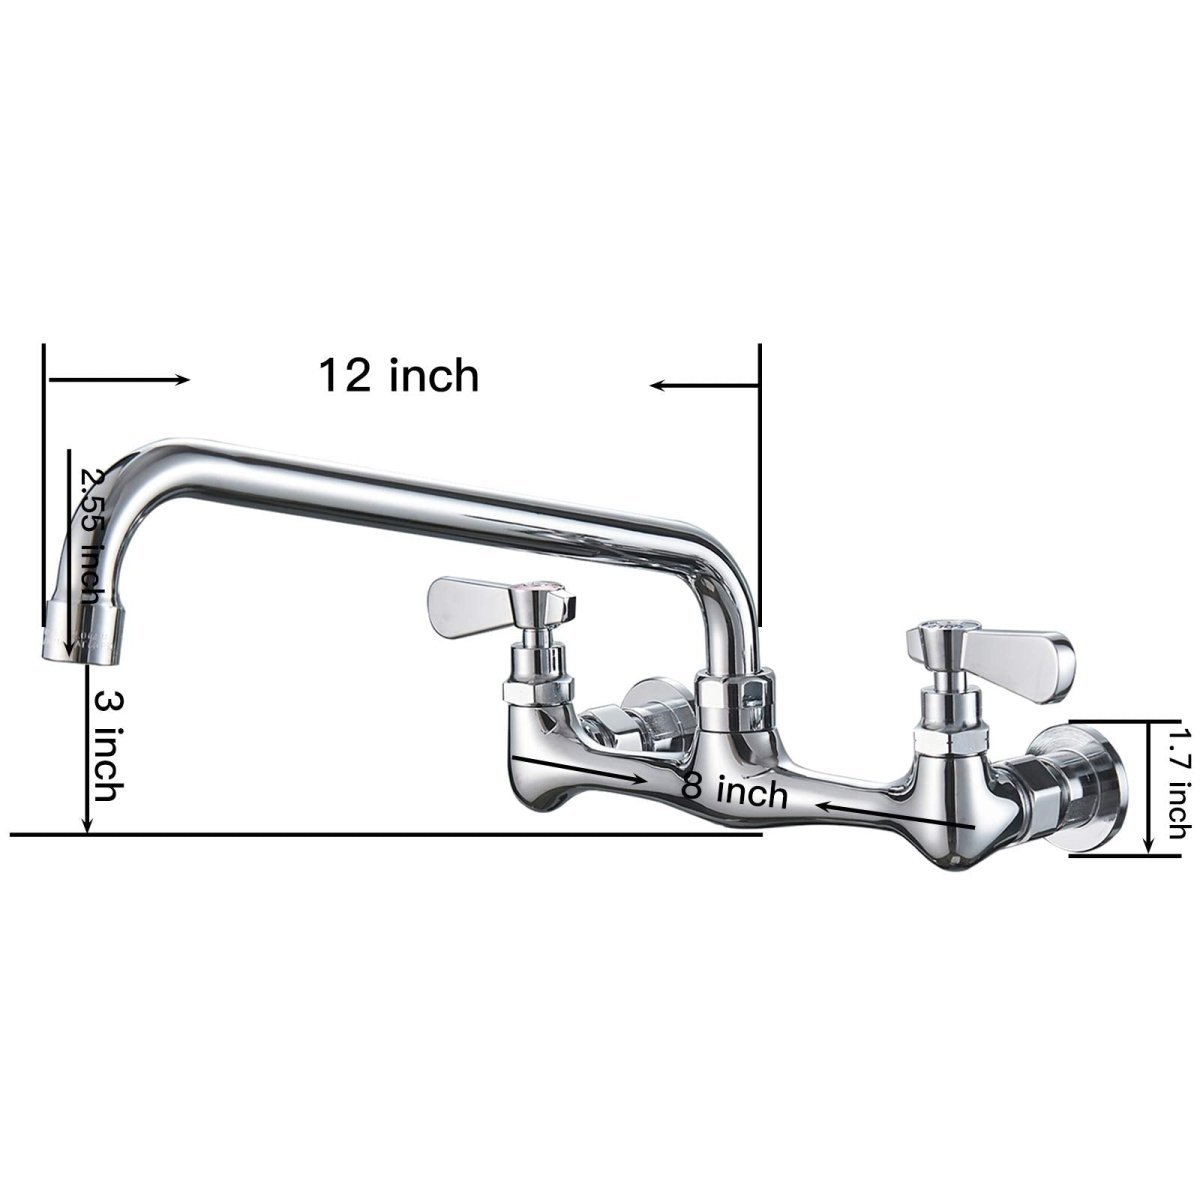 Wall Mount Kitchen Faucet with 12 Inch Swivel Spout Chrome-1 - buyfaucet.com